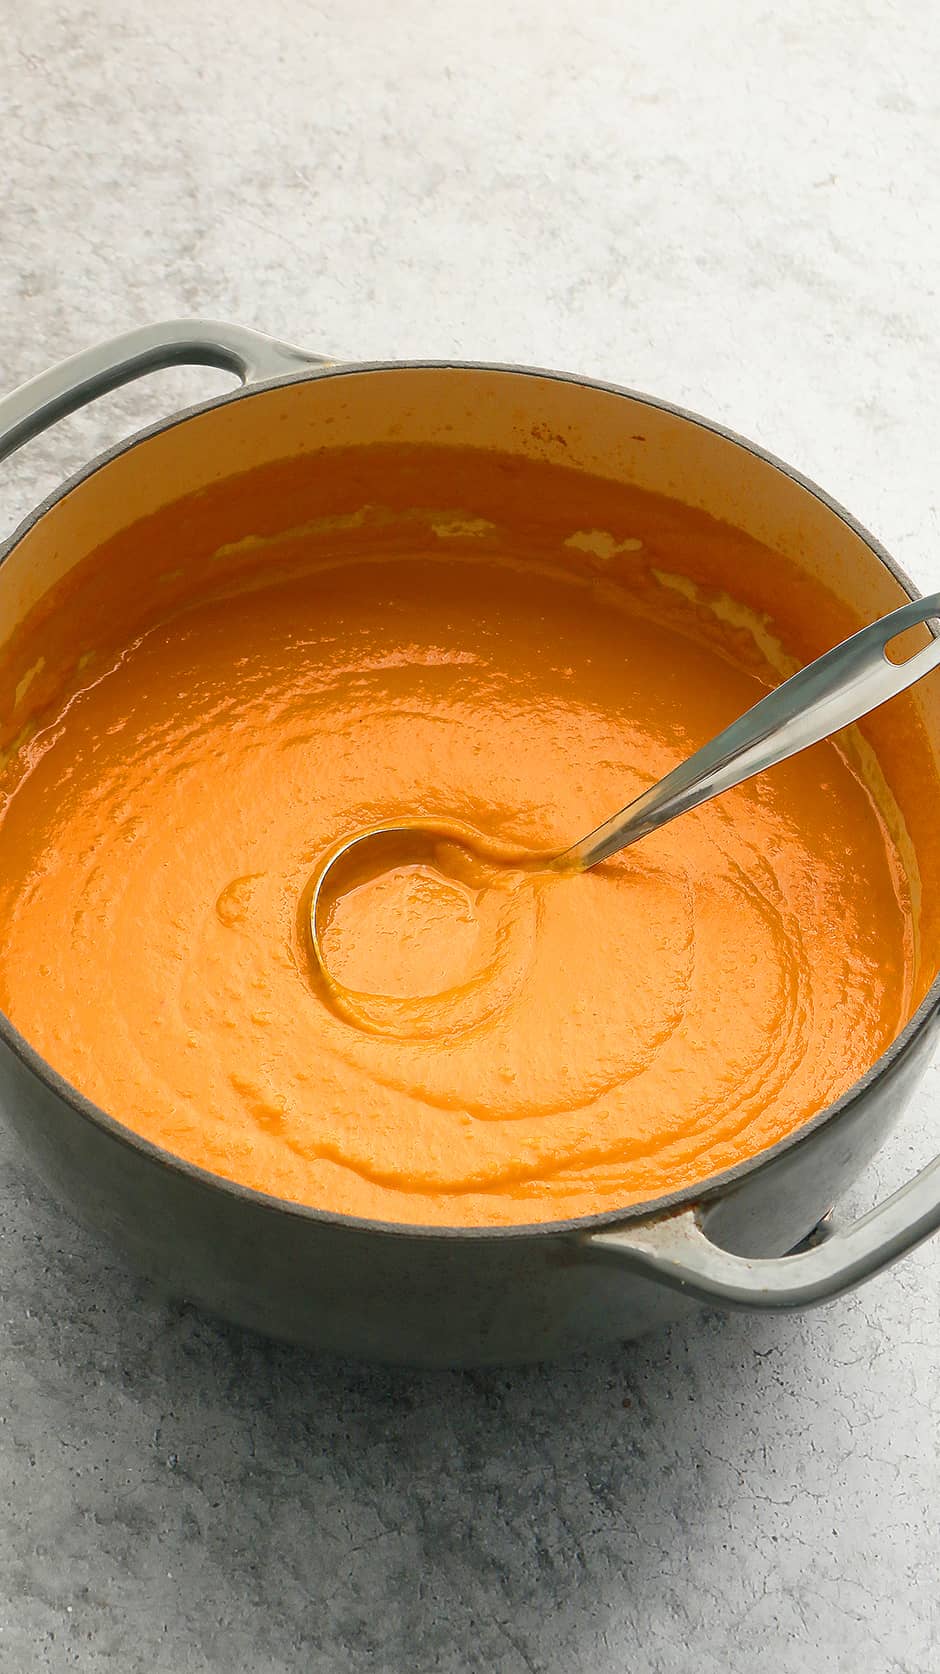 thick carrot soup in a enameled pot with a stainless steel ladle.